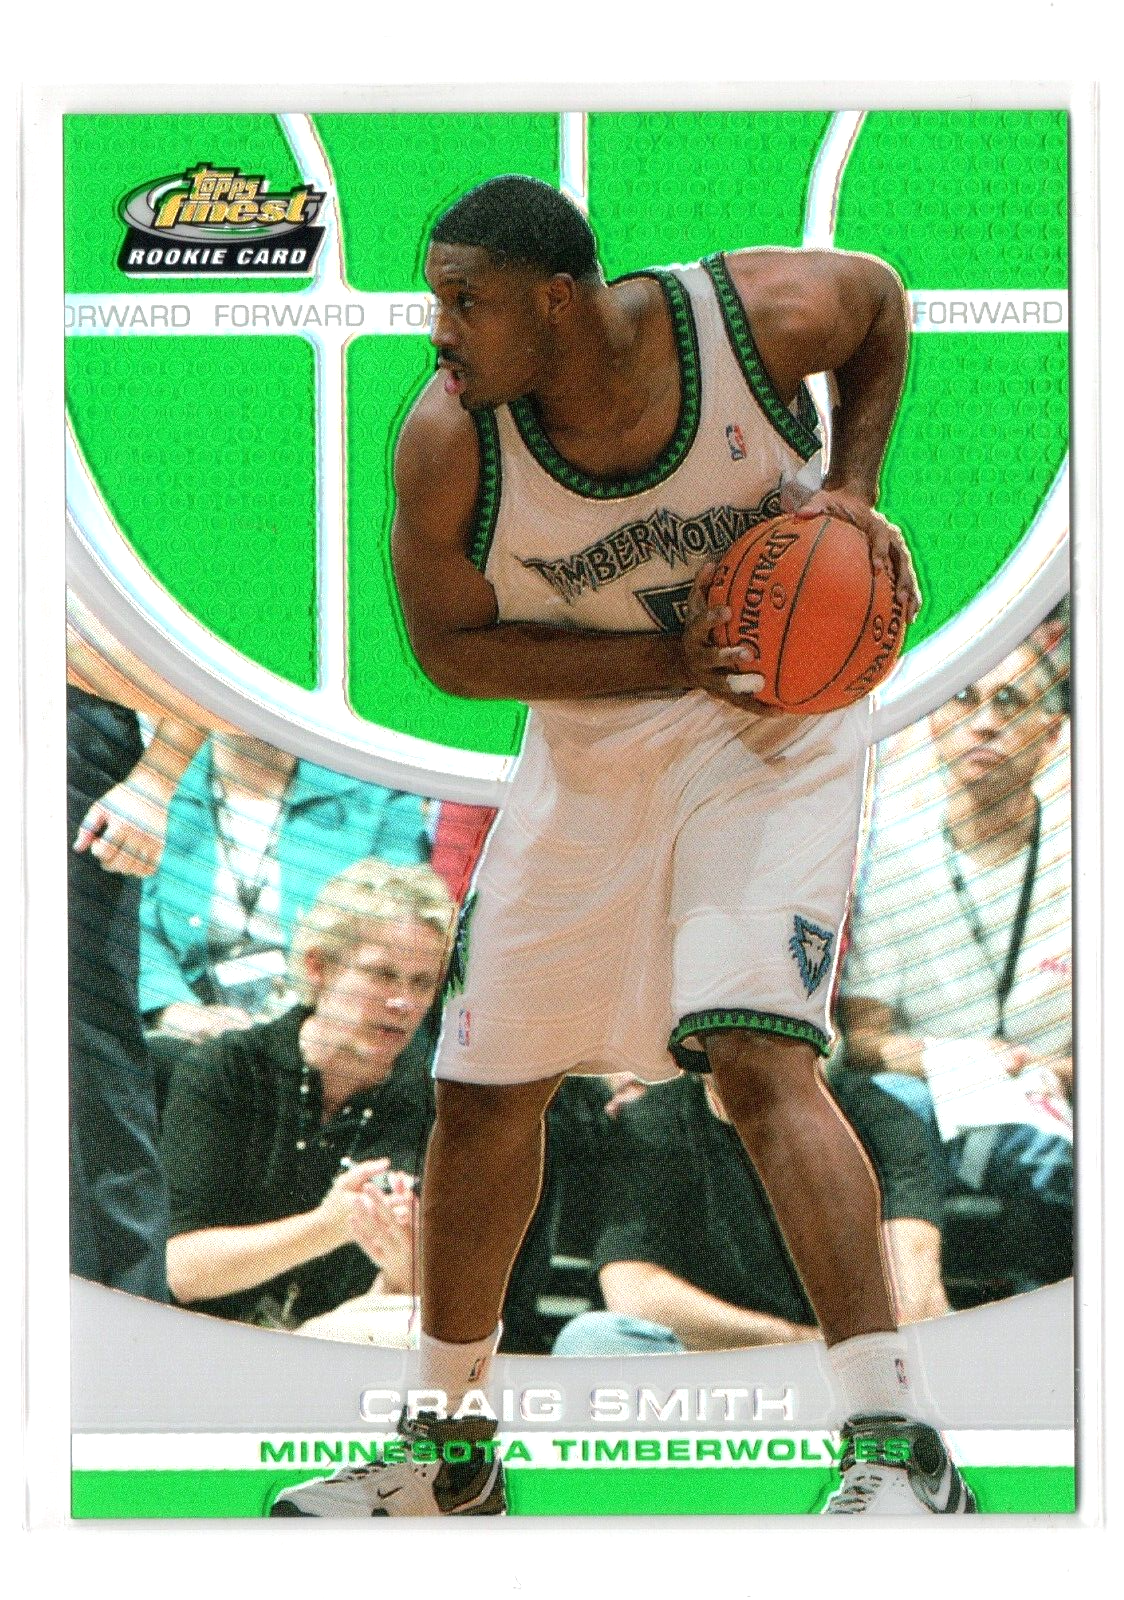 Primary image for 2005-06 Topps Finest 2006-07 Rookie Craig Smith #157 Green Refractor /129 NM-MT